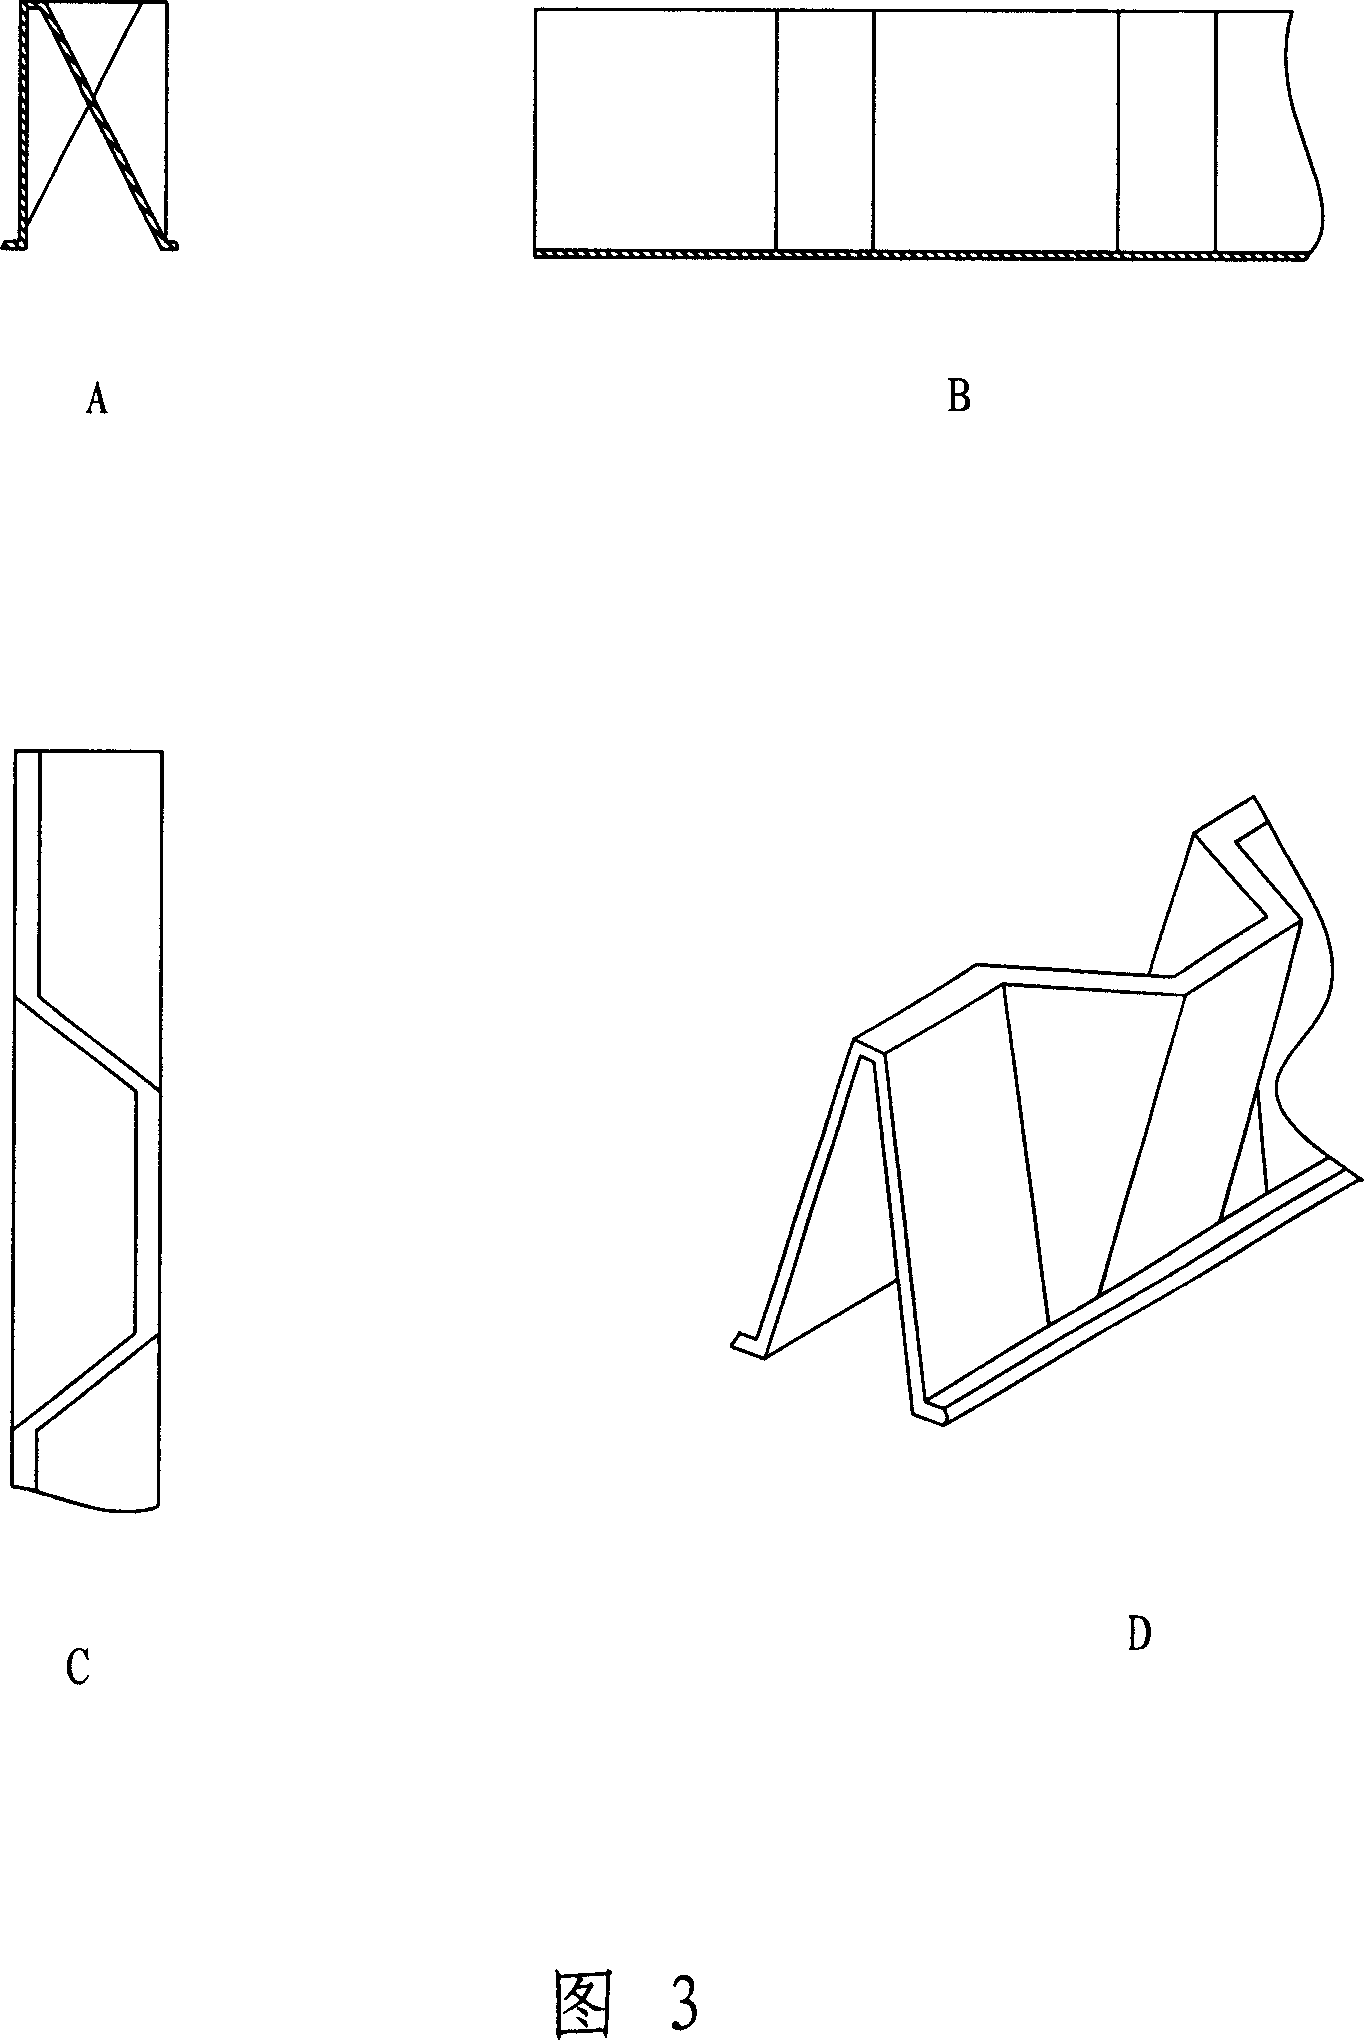 Chaos fin and plate-fin heat exchanger comprising the same